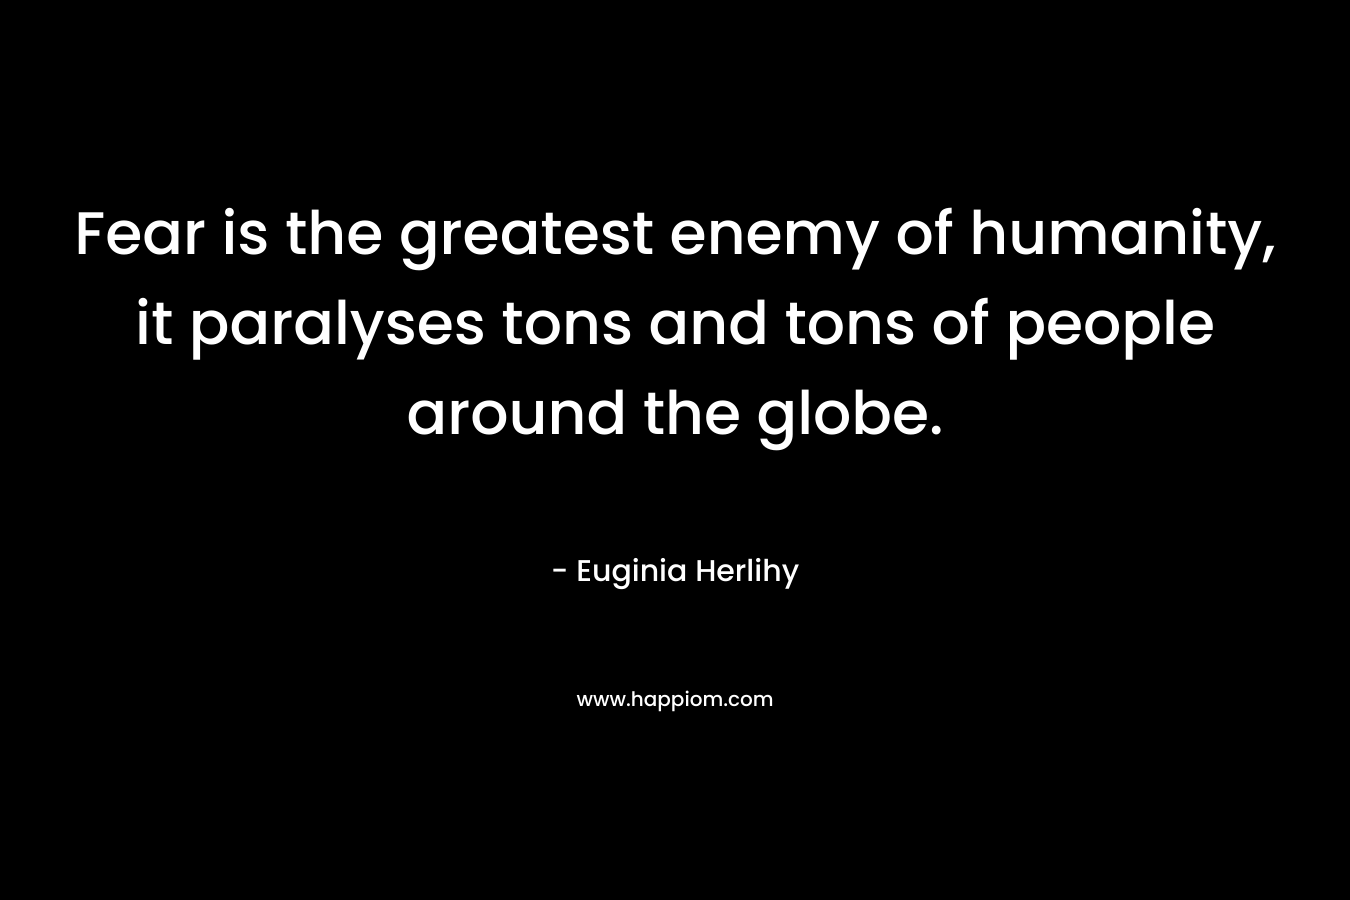 Fear is the greatest enemy of humanity, it paralyses tons and tons of people around the globe.